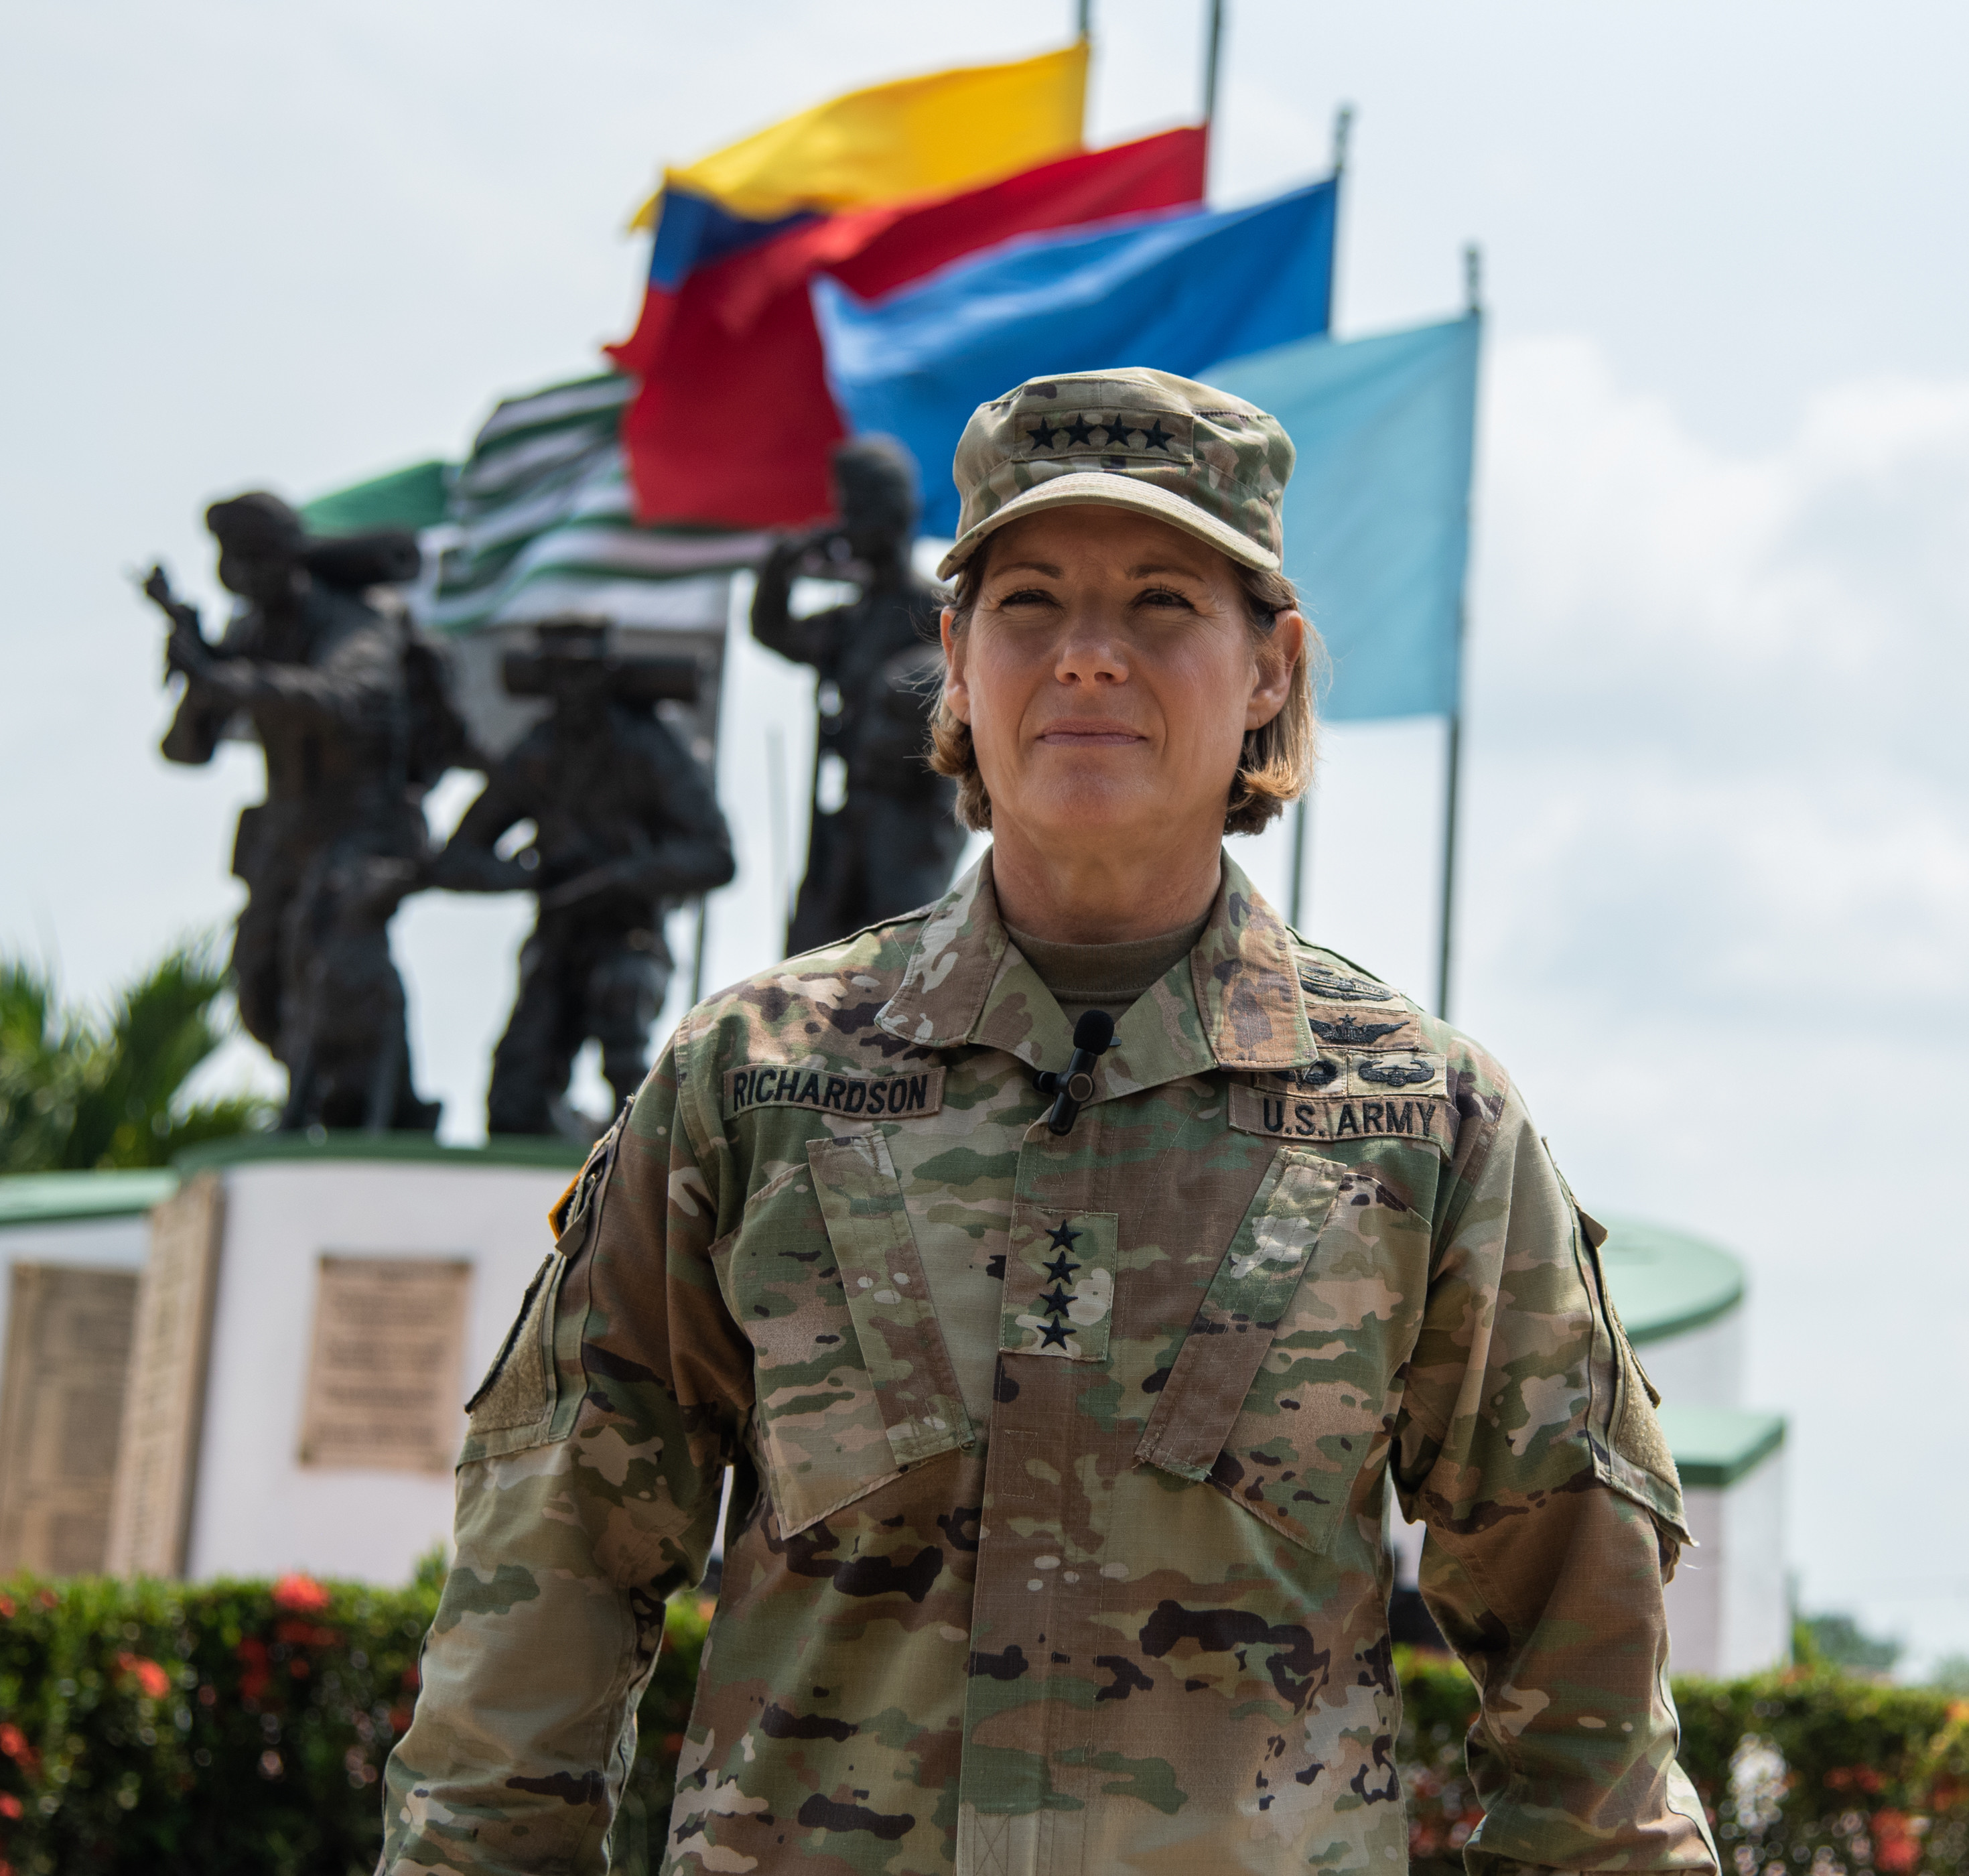 Colombian Women Return to Military Service After More Than 20